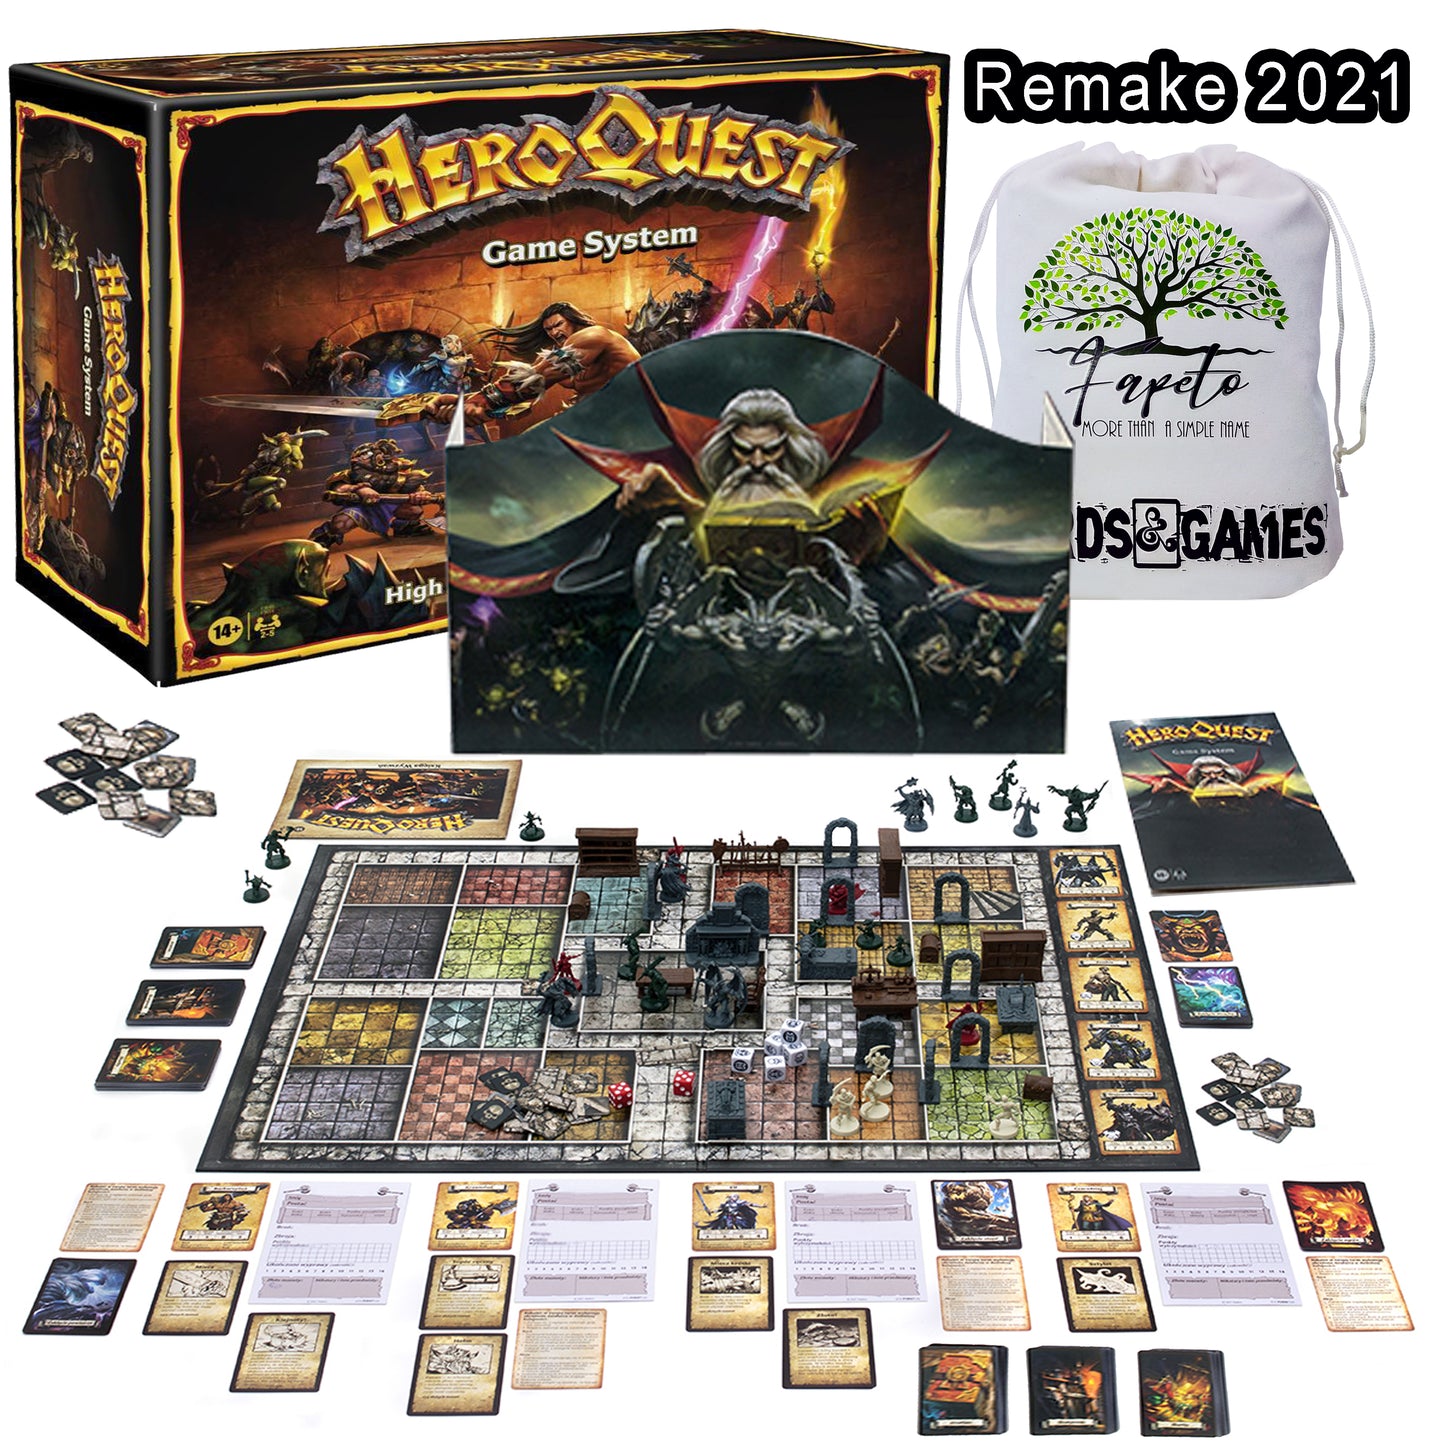 A Fantasy Dungeon crawler Tabletop Game, Bundles of Hero Quest Game System and Expansions,  14+